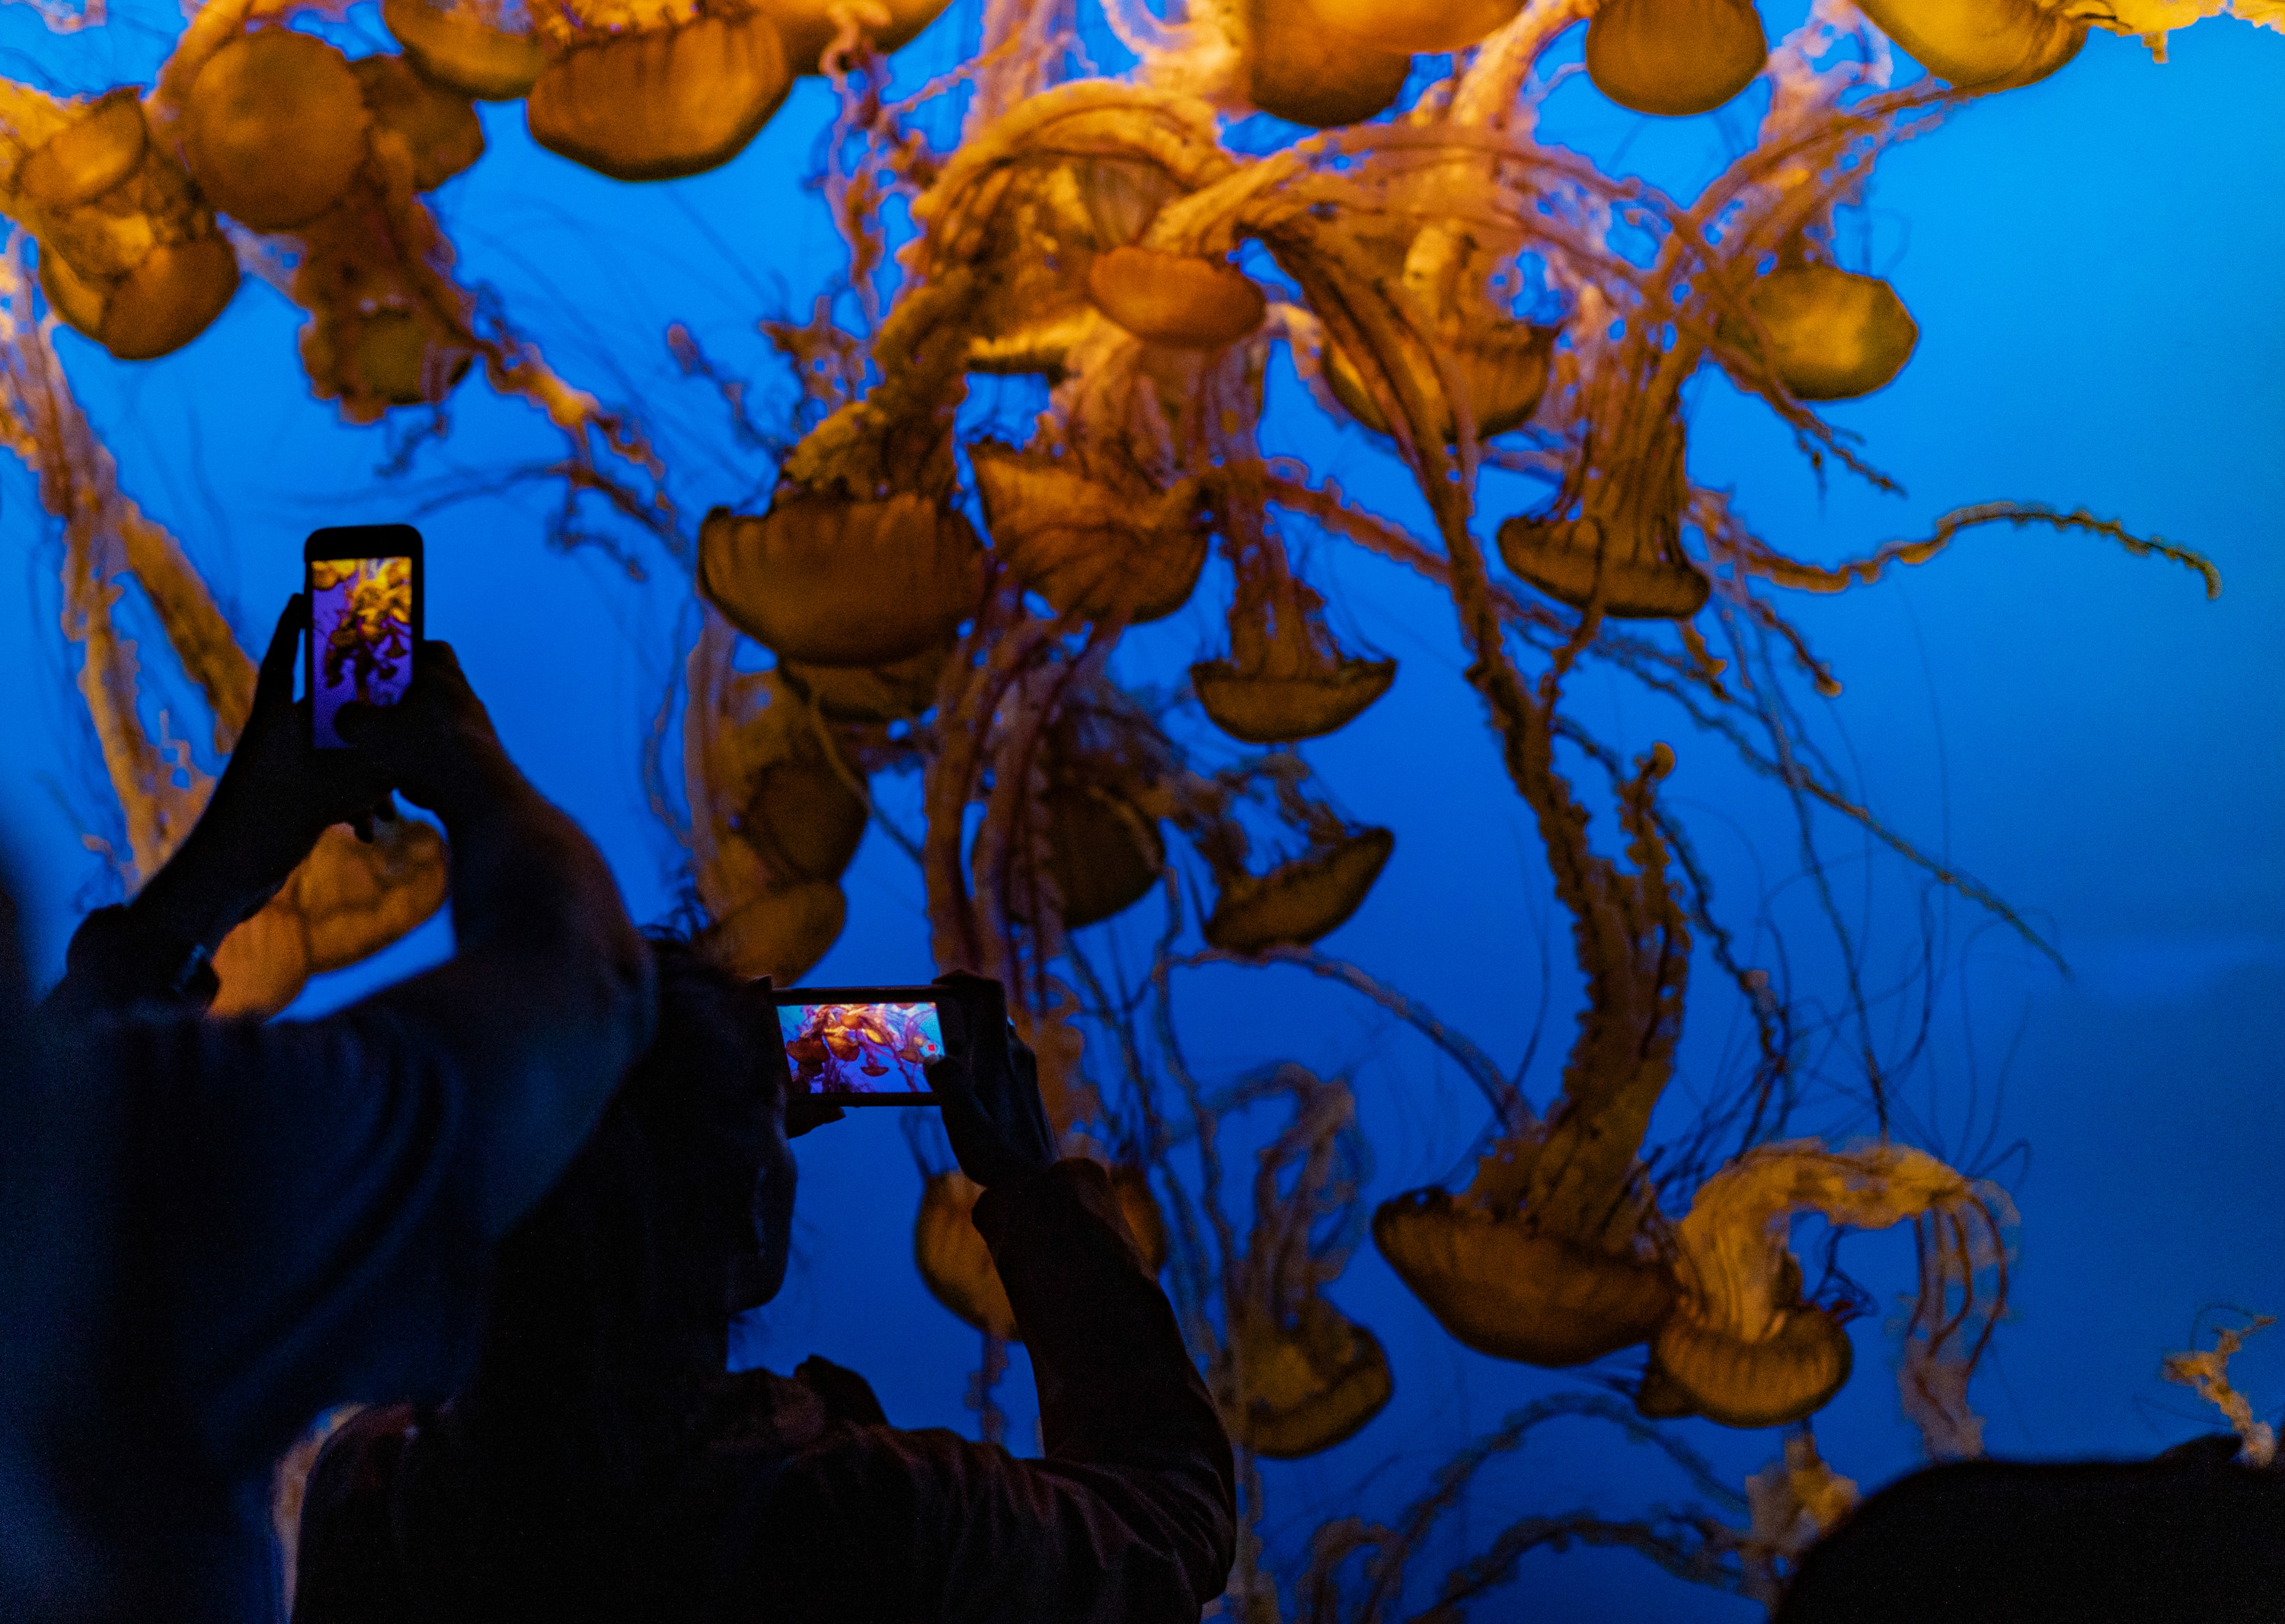 People taking pictures of jellyfish in an aquarium